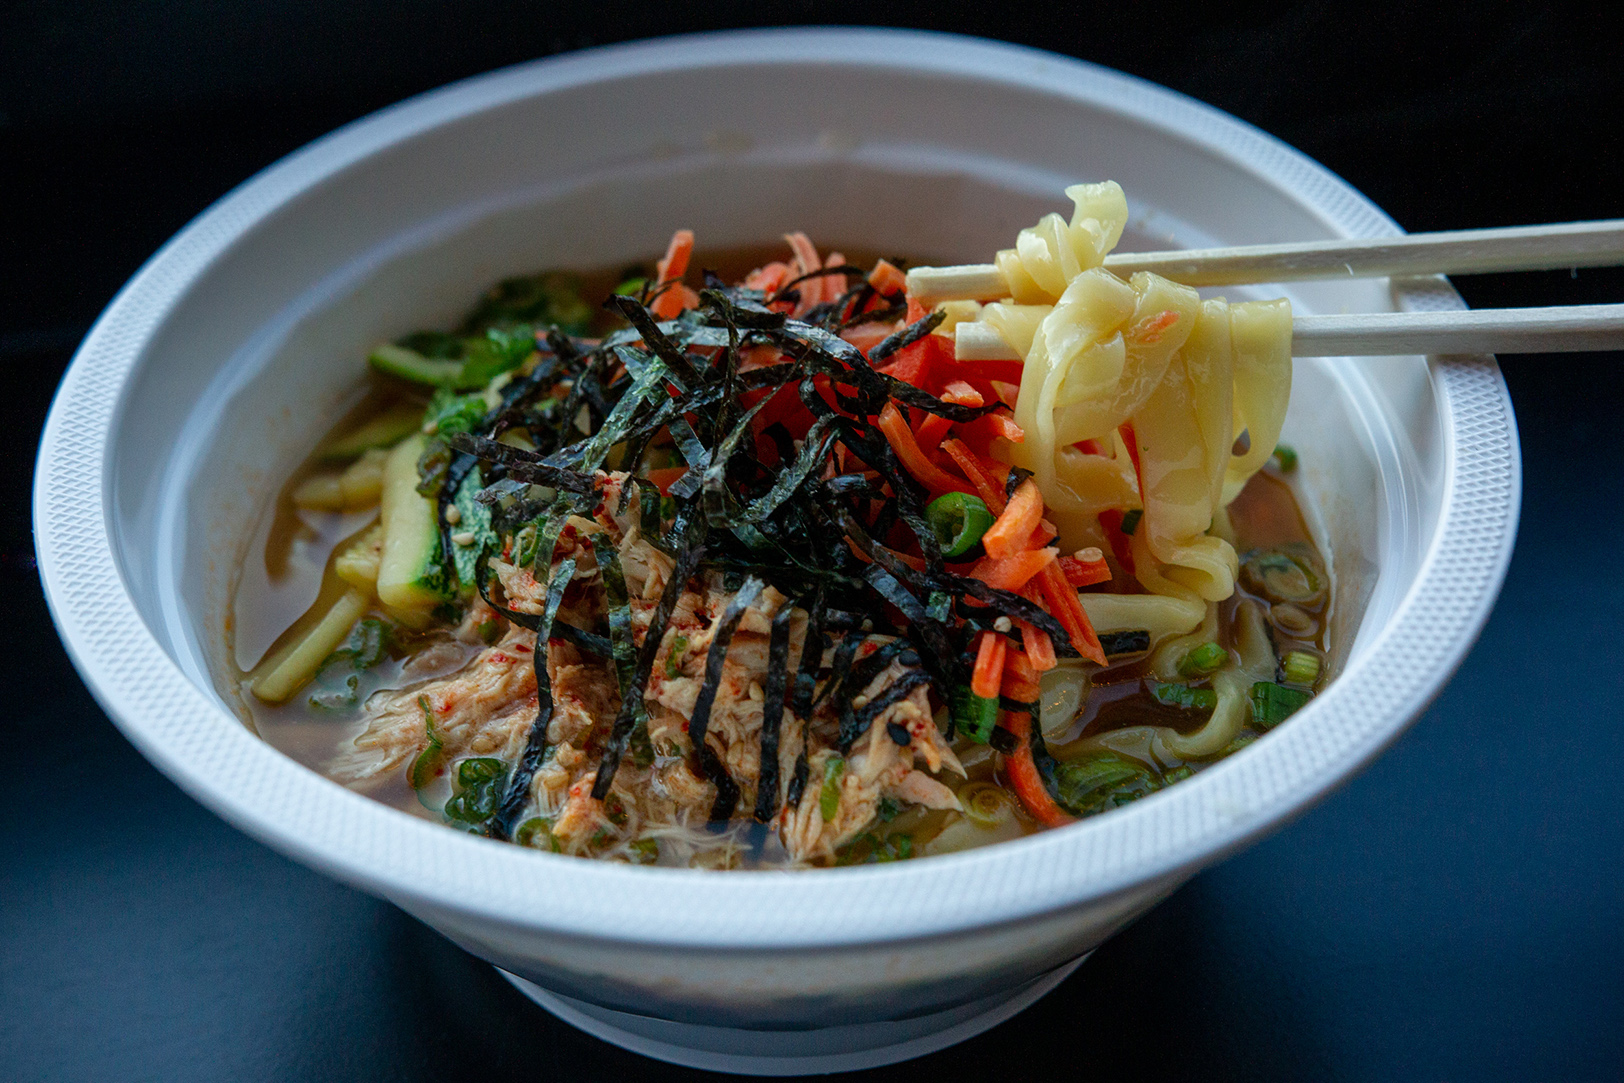 Limited run, limited risk: Sura Eats chef tests appetite for expansion with Korean noodle bar 